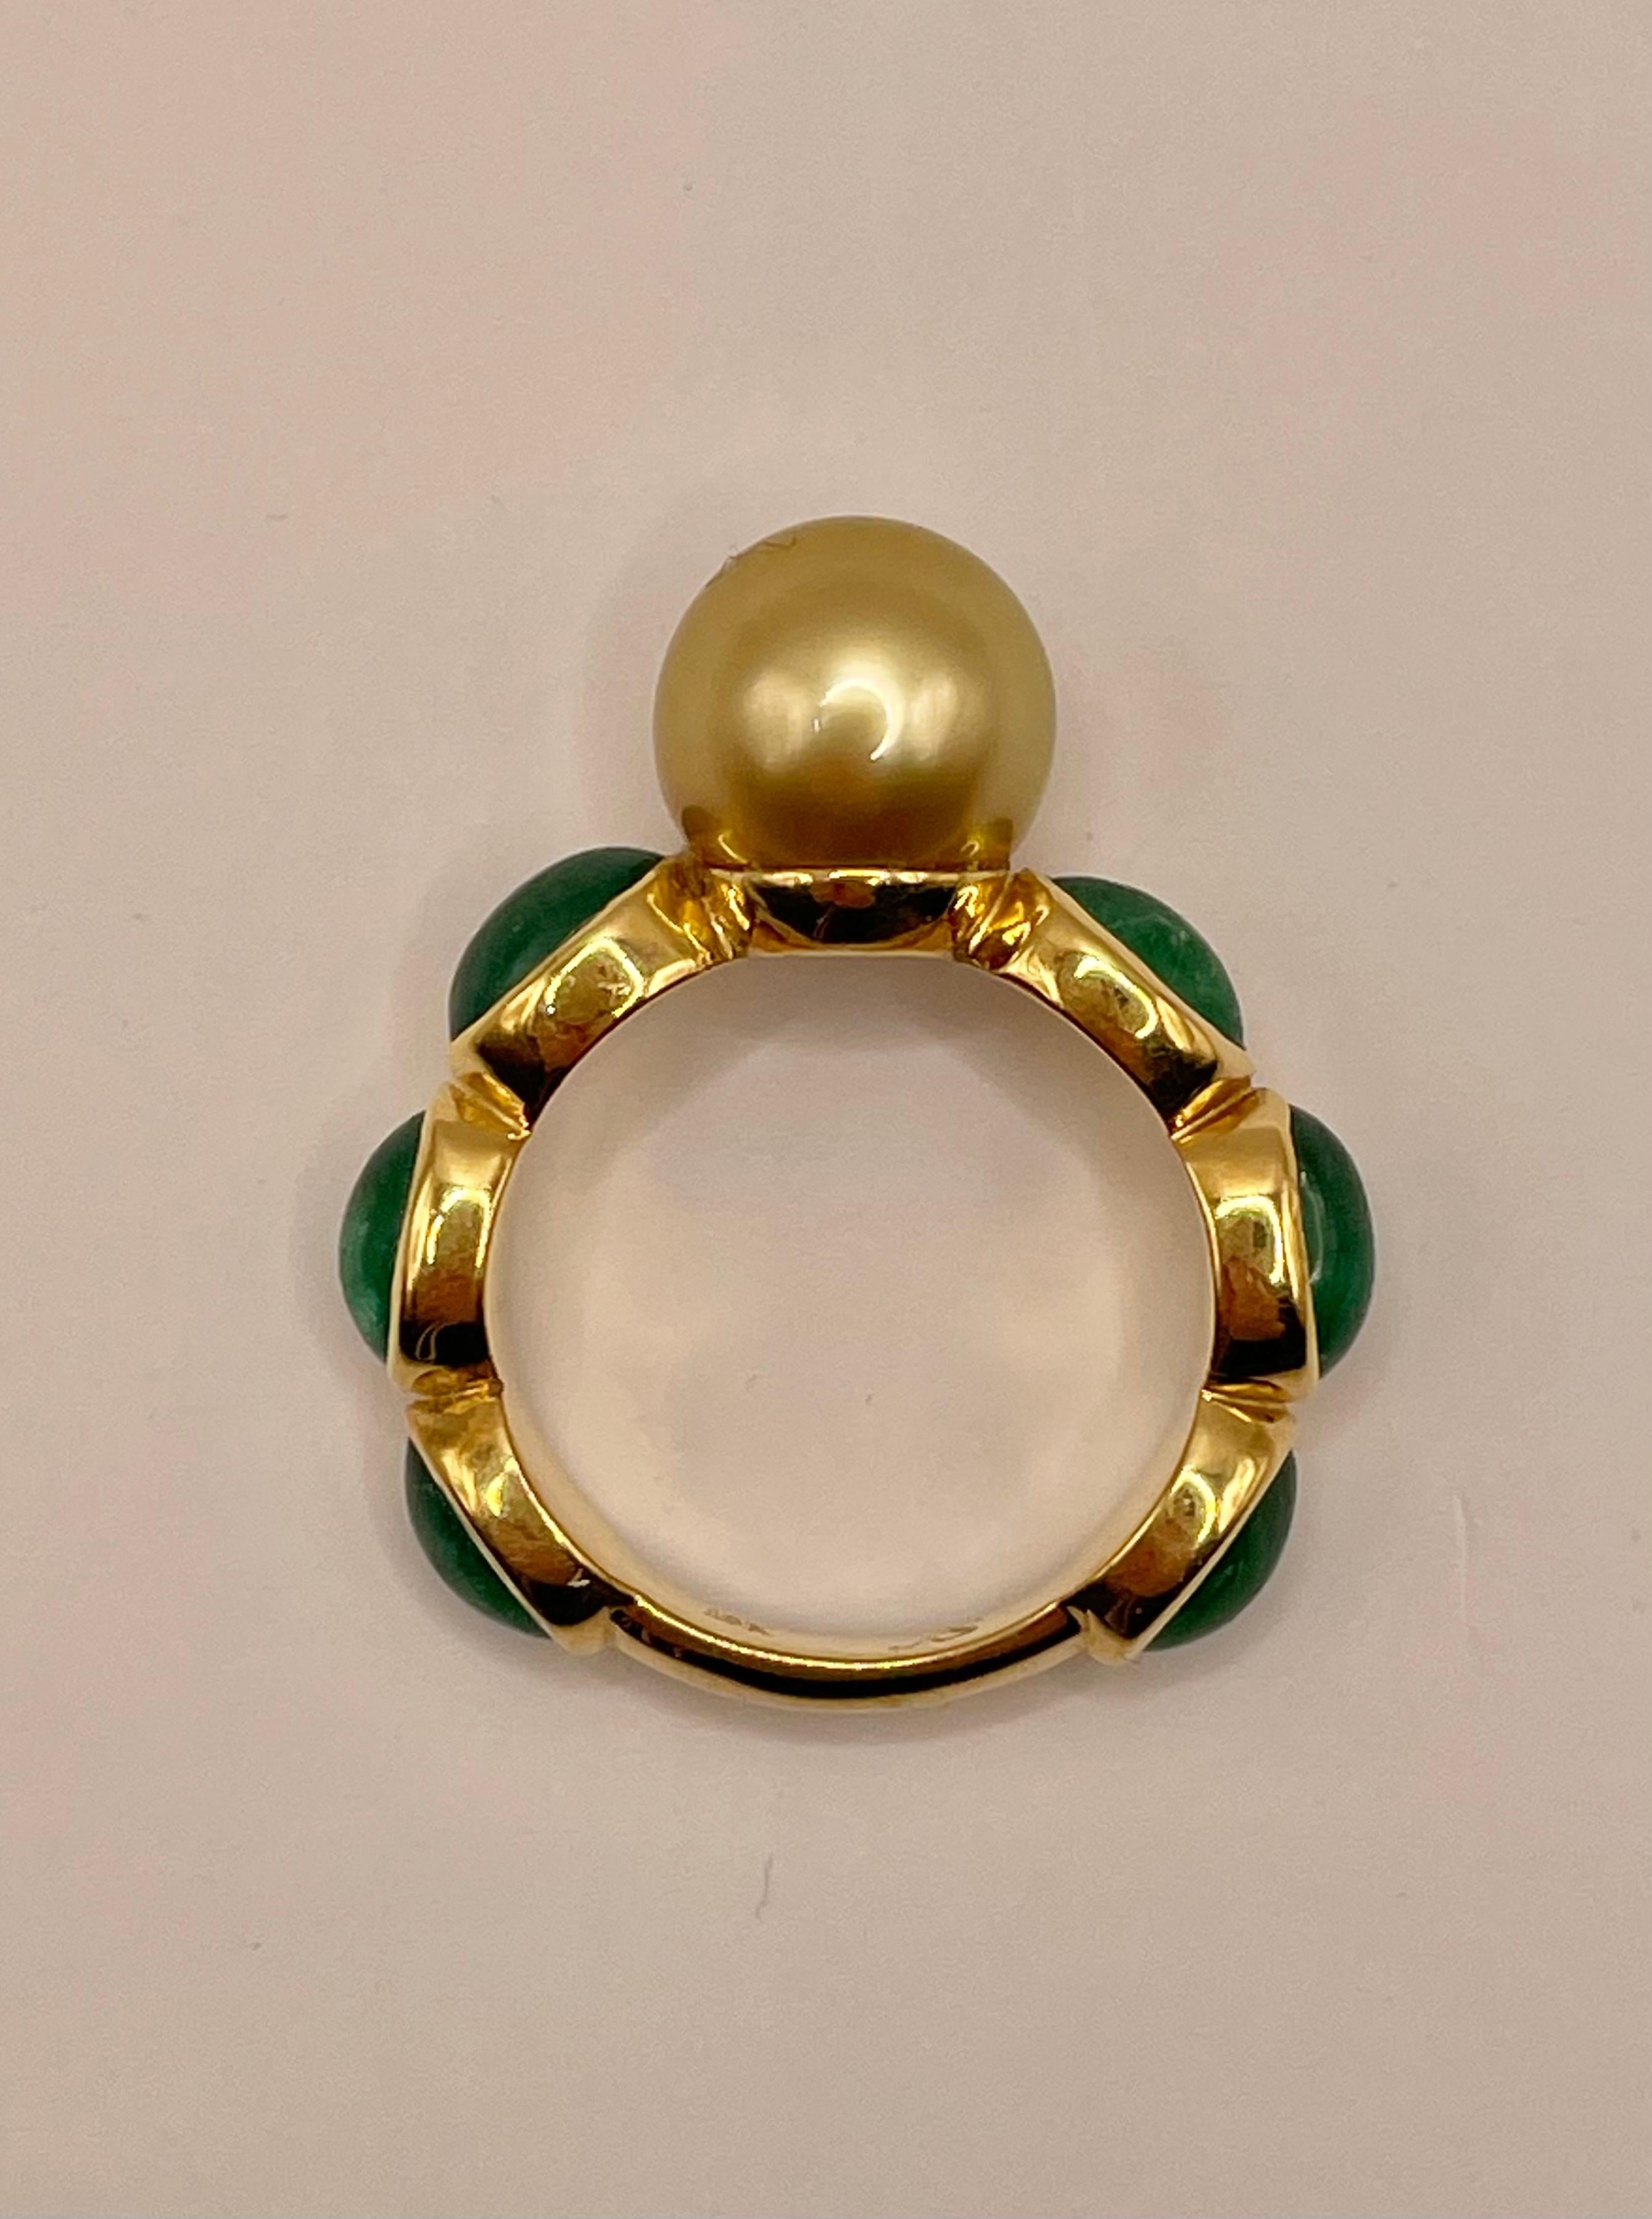 Yellow 10mm south sea pearl and 6 cabochon emeralds ring set in 18k yellow gold ,size 6.5.
One of a kind !